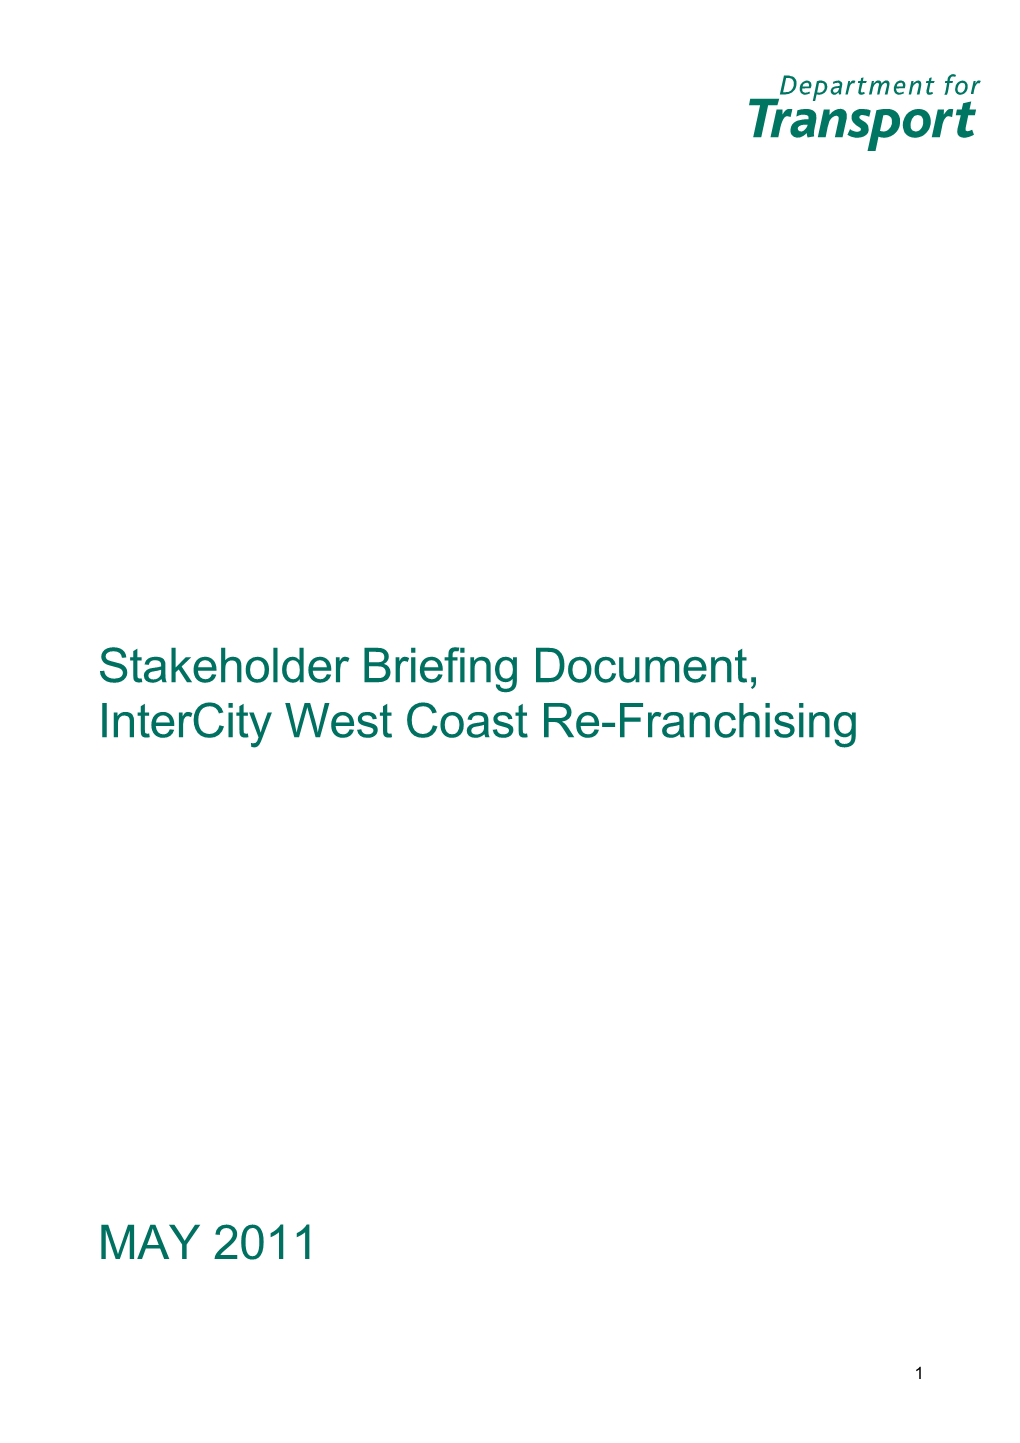 Stakeholder Briefing Document, Intercity West Coast Re-Franchising